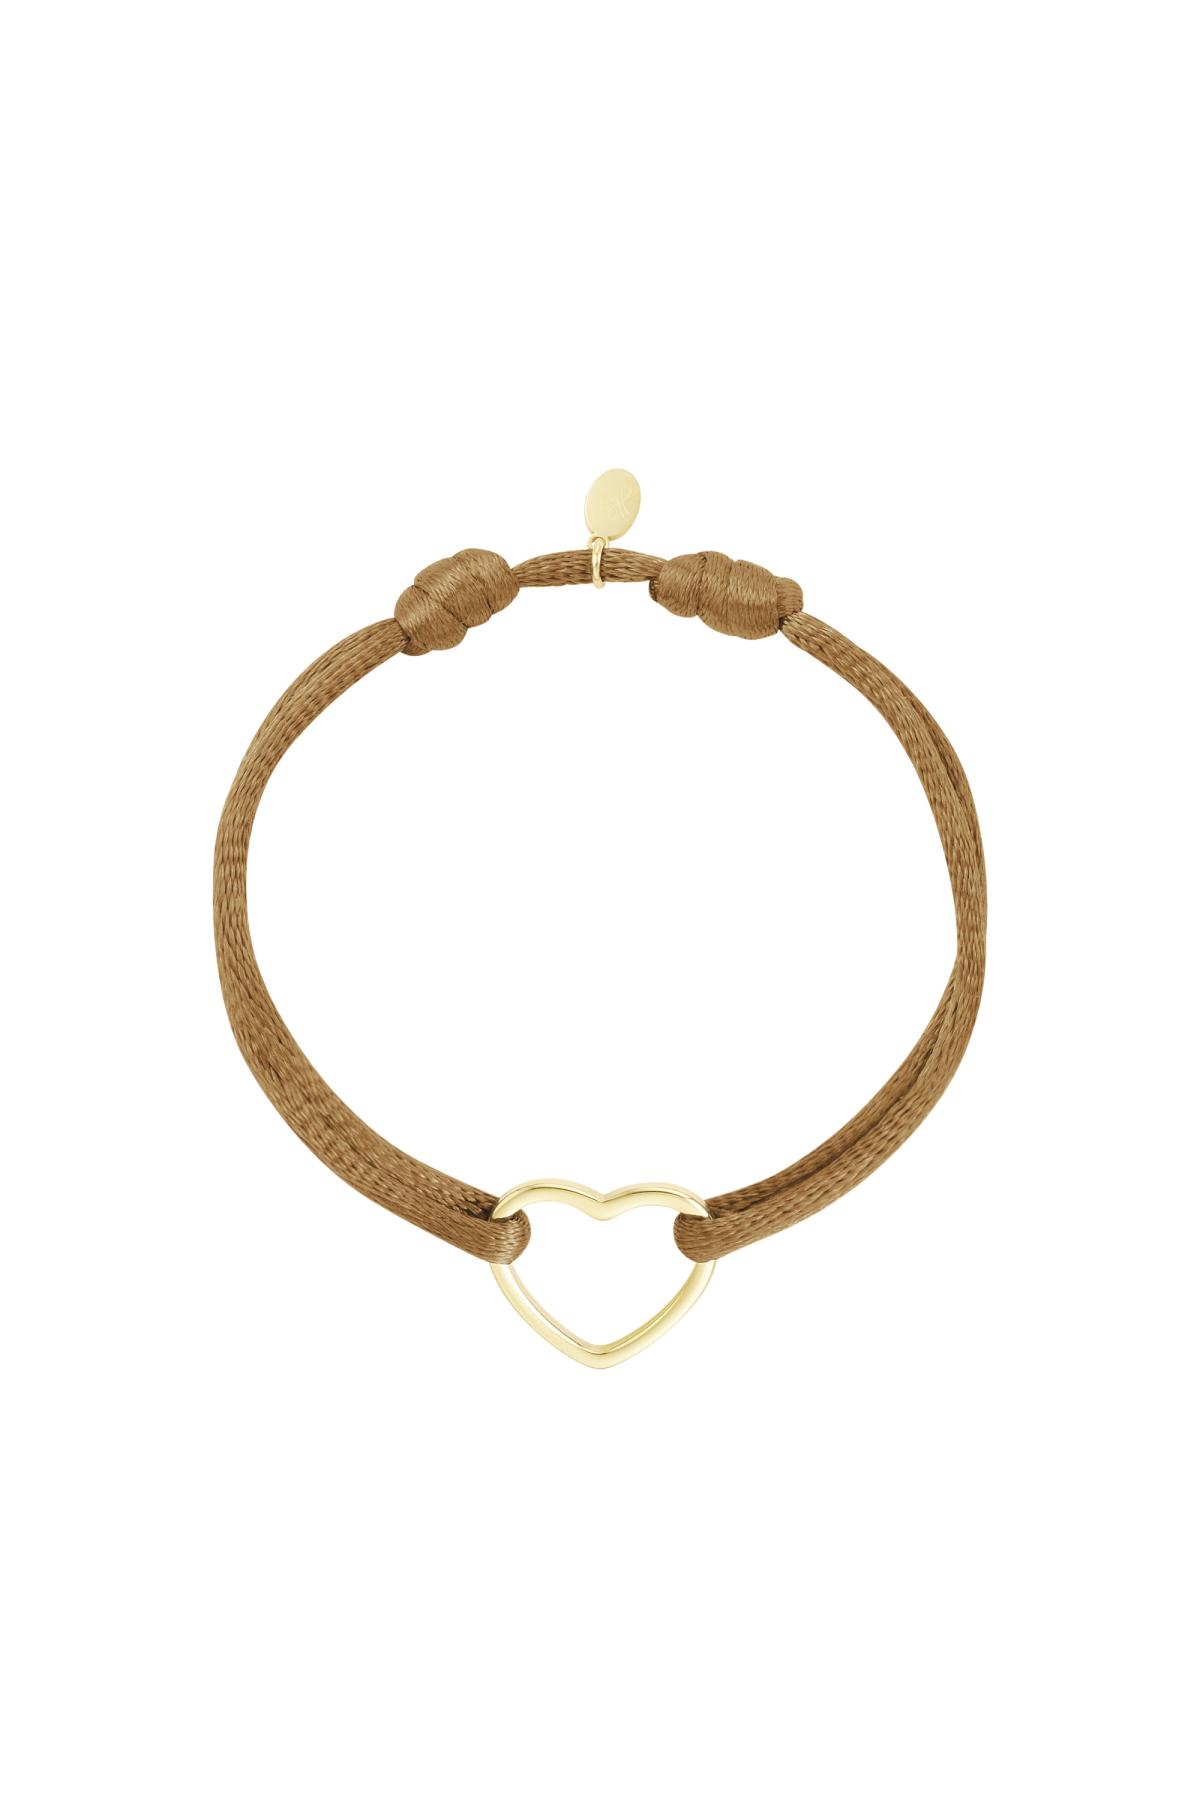 Bracciale in tessuto cuore Brown Stainless Steel h5 